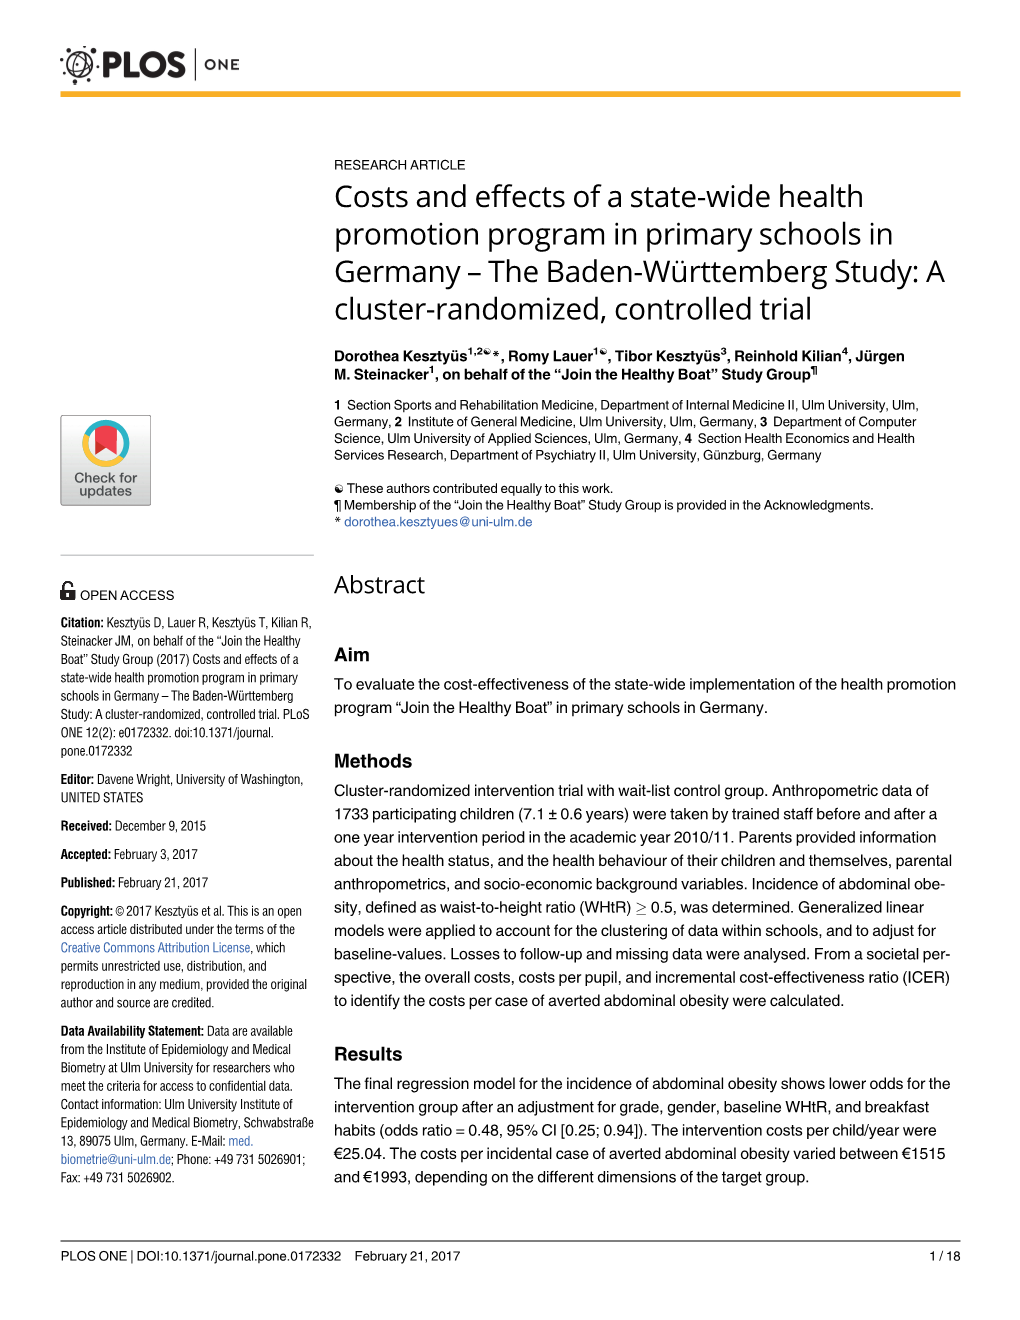 Costs and Effects of a State-Wide Health Promotion Program in Primary Schools in Germany – the Baden-Wu¨Rttemberg Study: a Cluster-Randomized, Controlled Trial